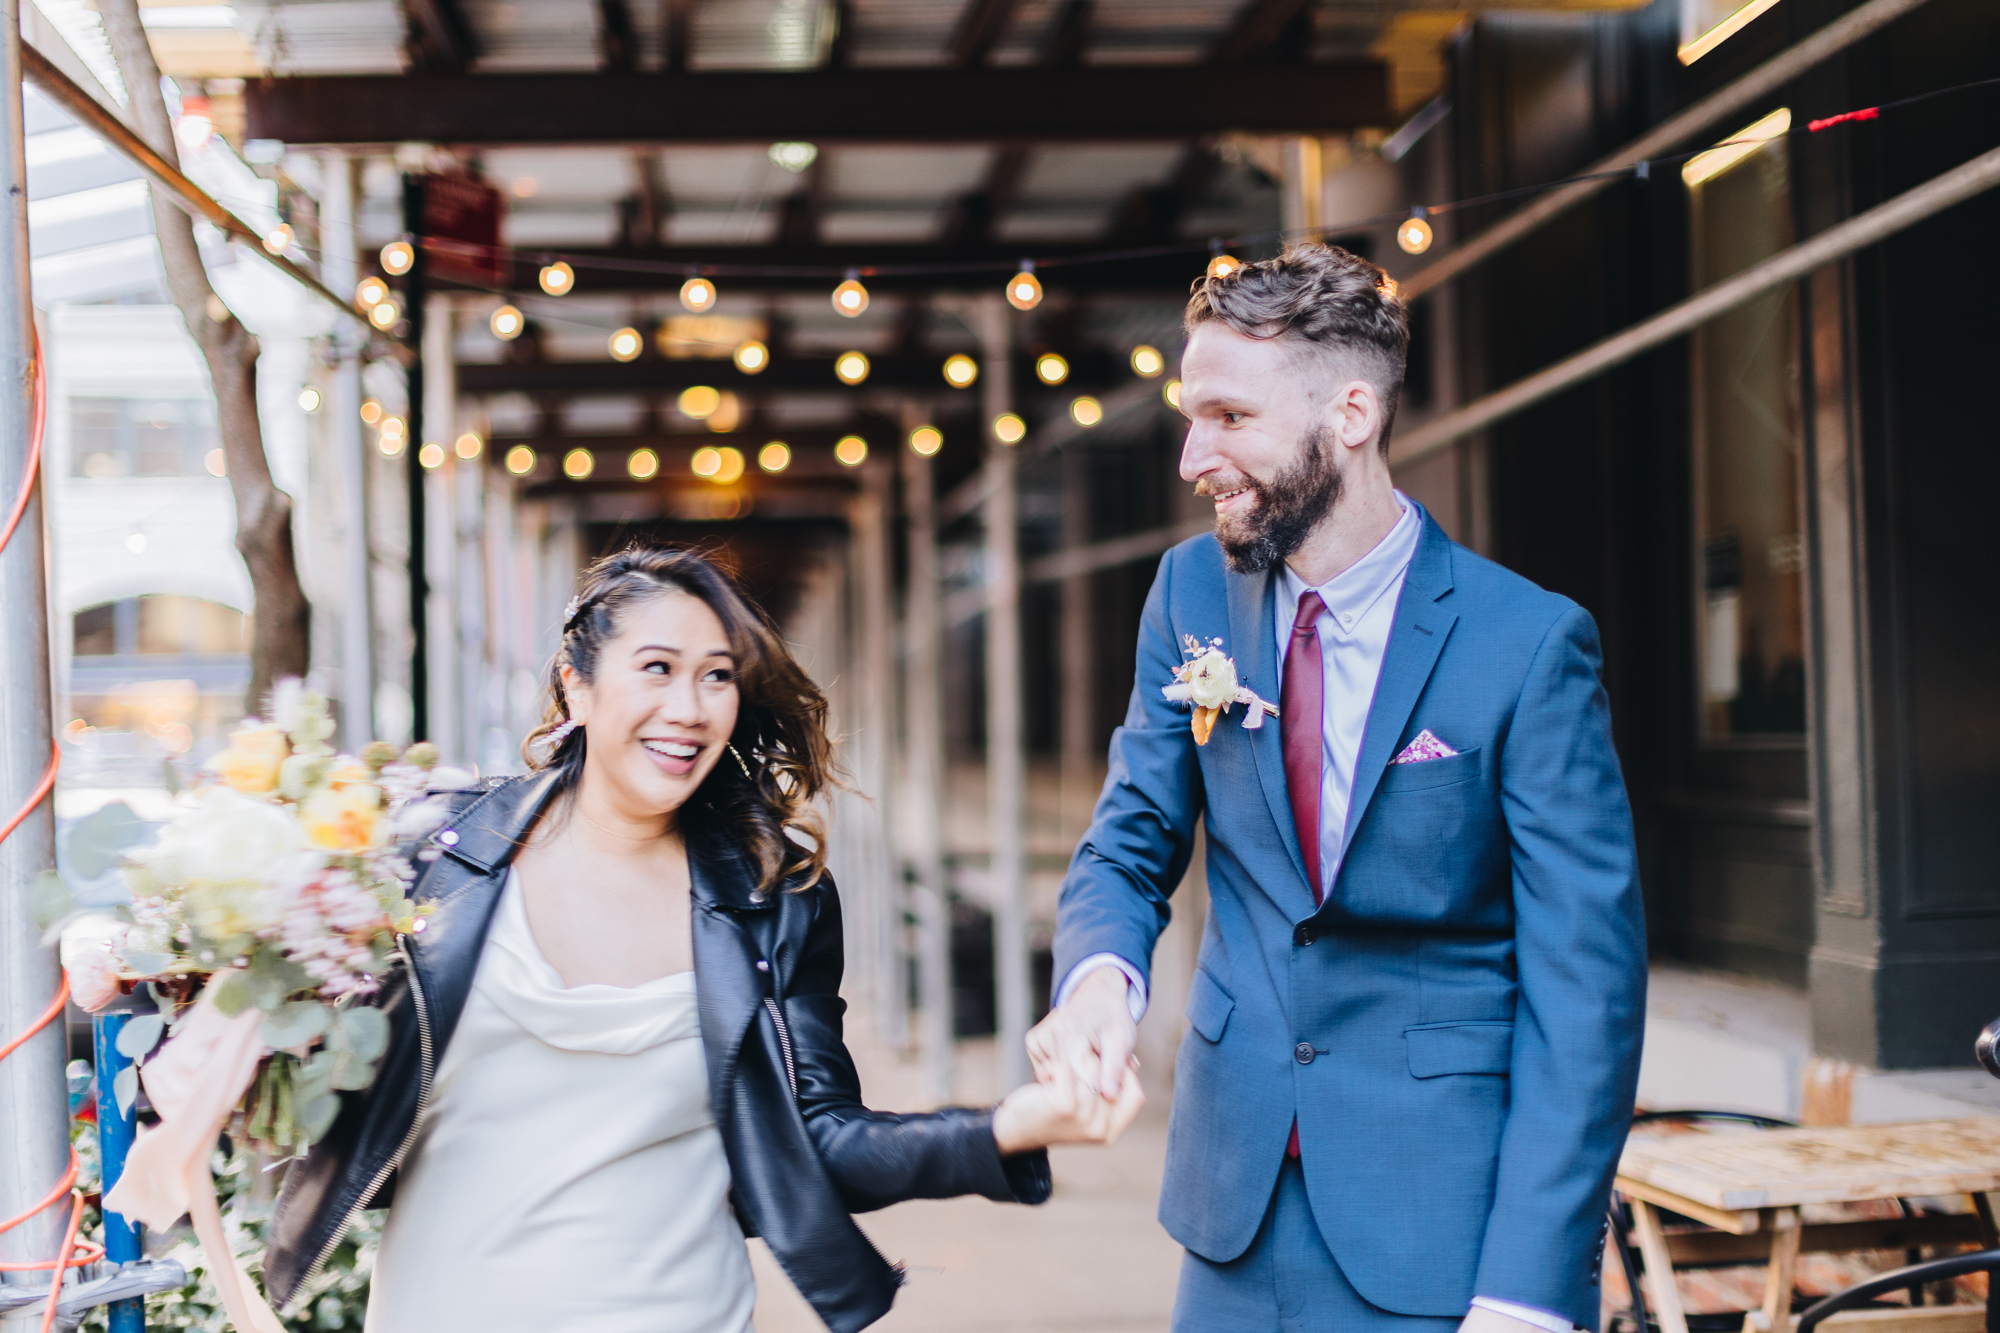 Loving Fall DUMBO Elopement with NYC views and foliage